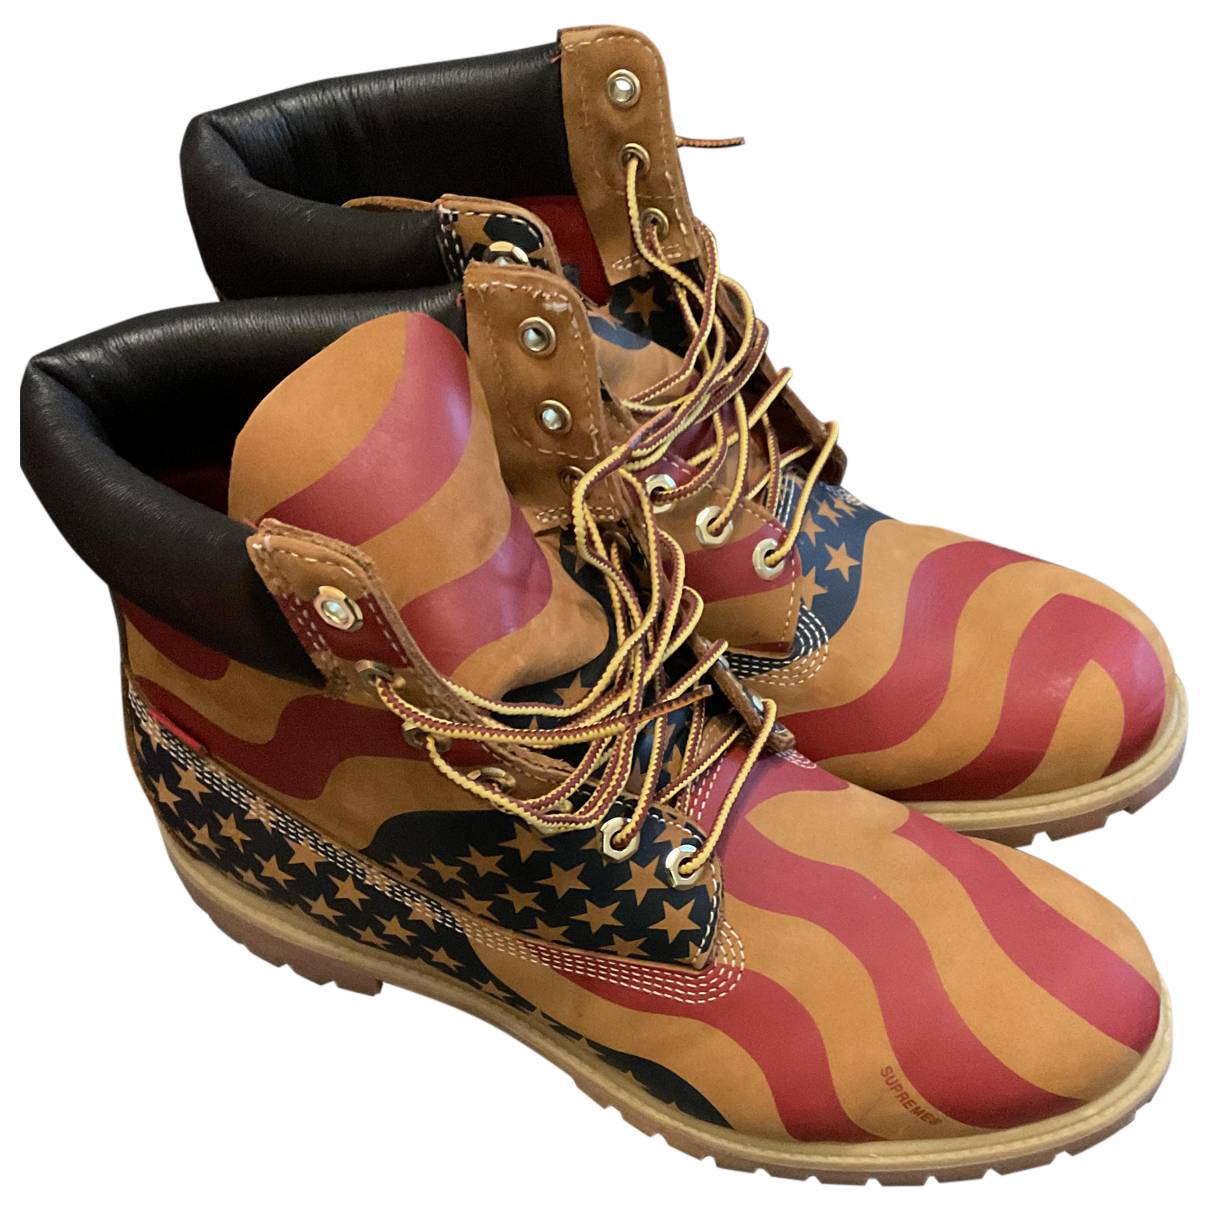 Leather boots SUPREME X TIMBERLAND Multicolour size 46 EU in 